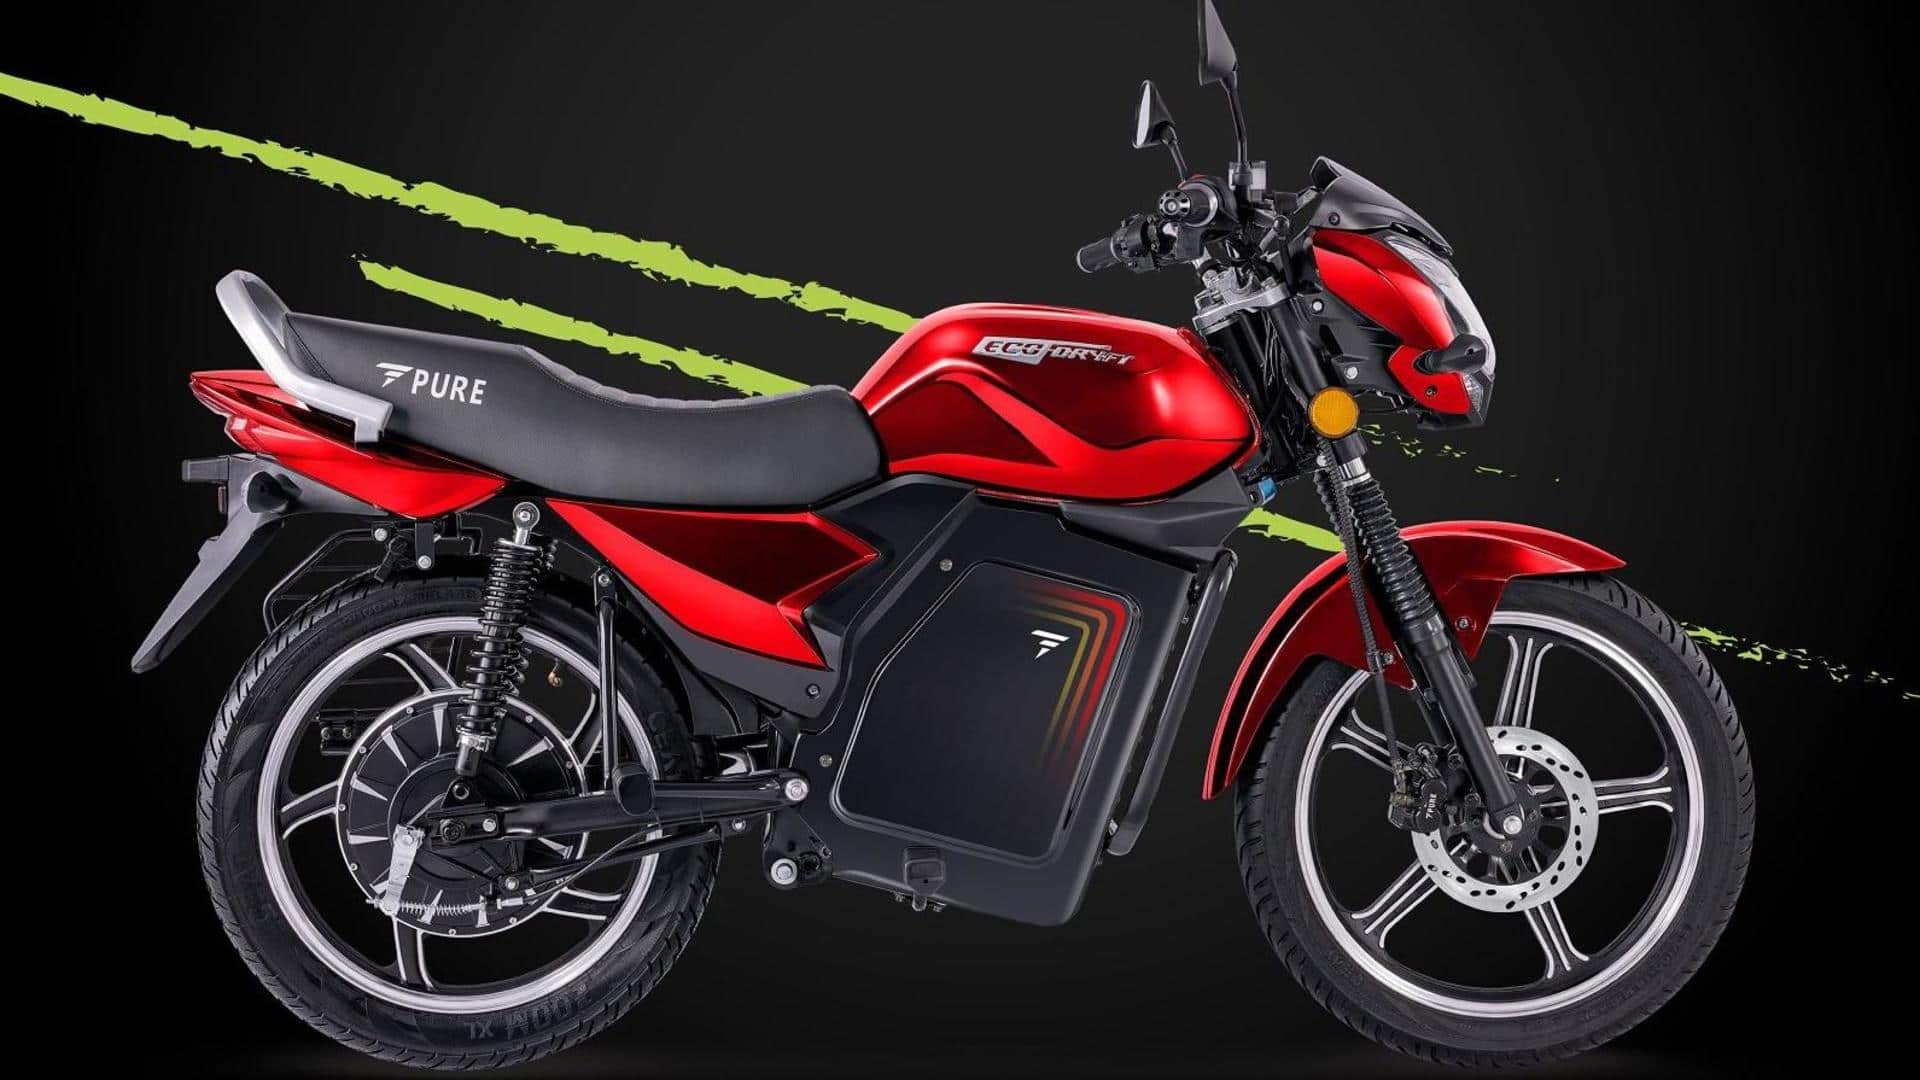 PURE ecoDryft arrives as India's cheapest electric motorcycle: Check price